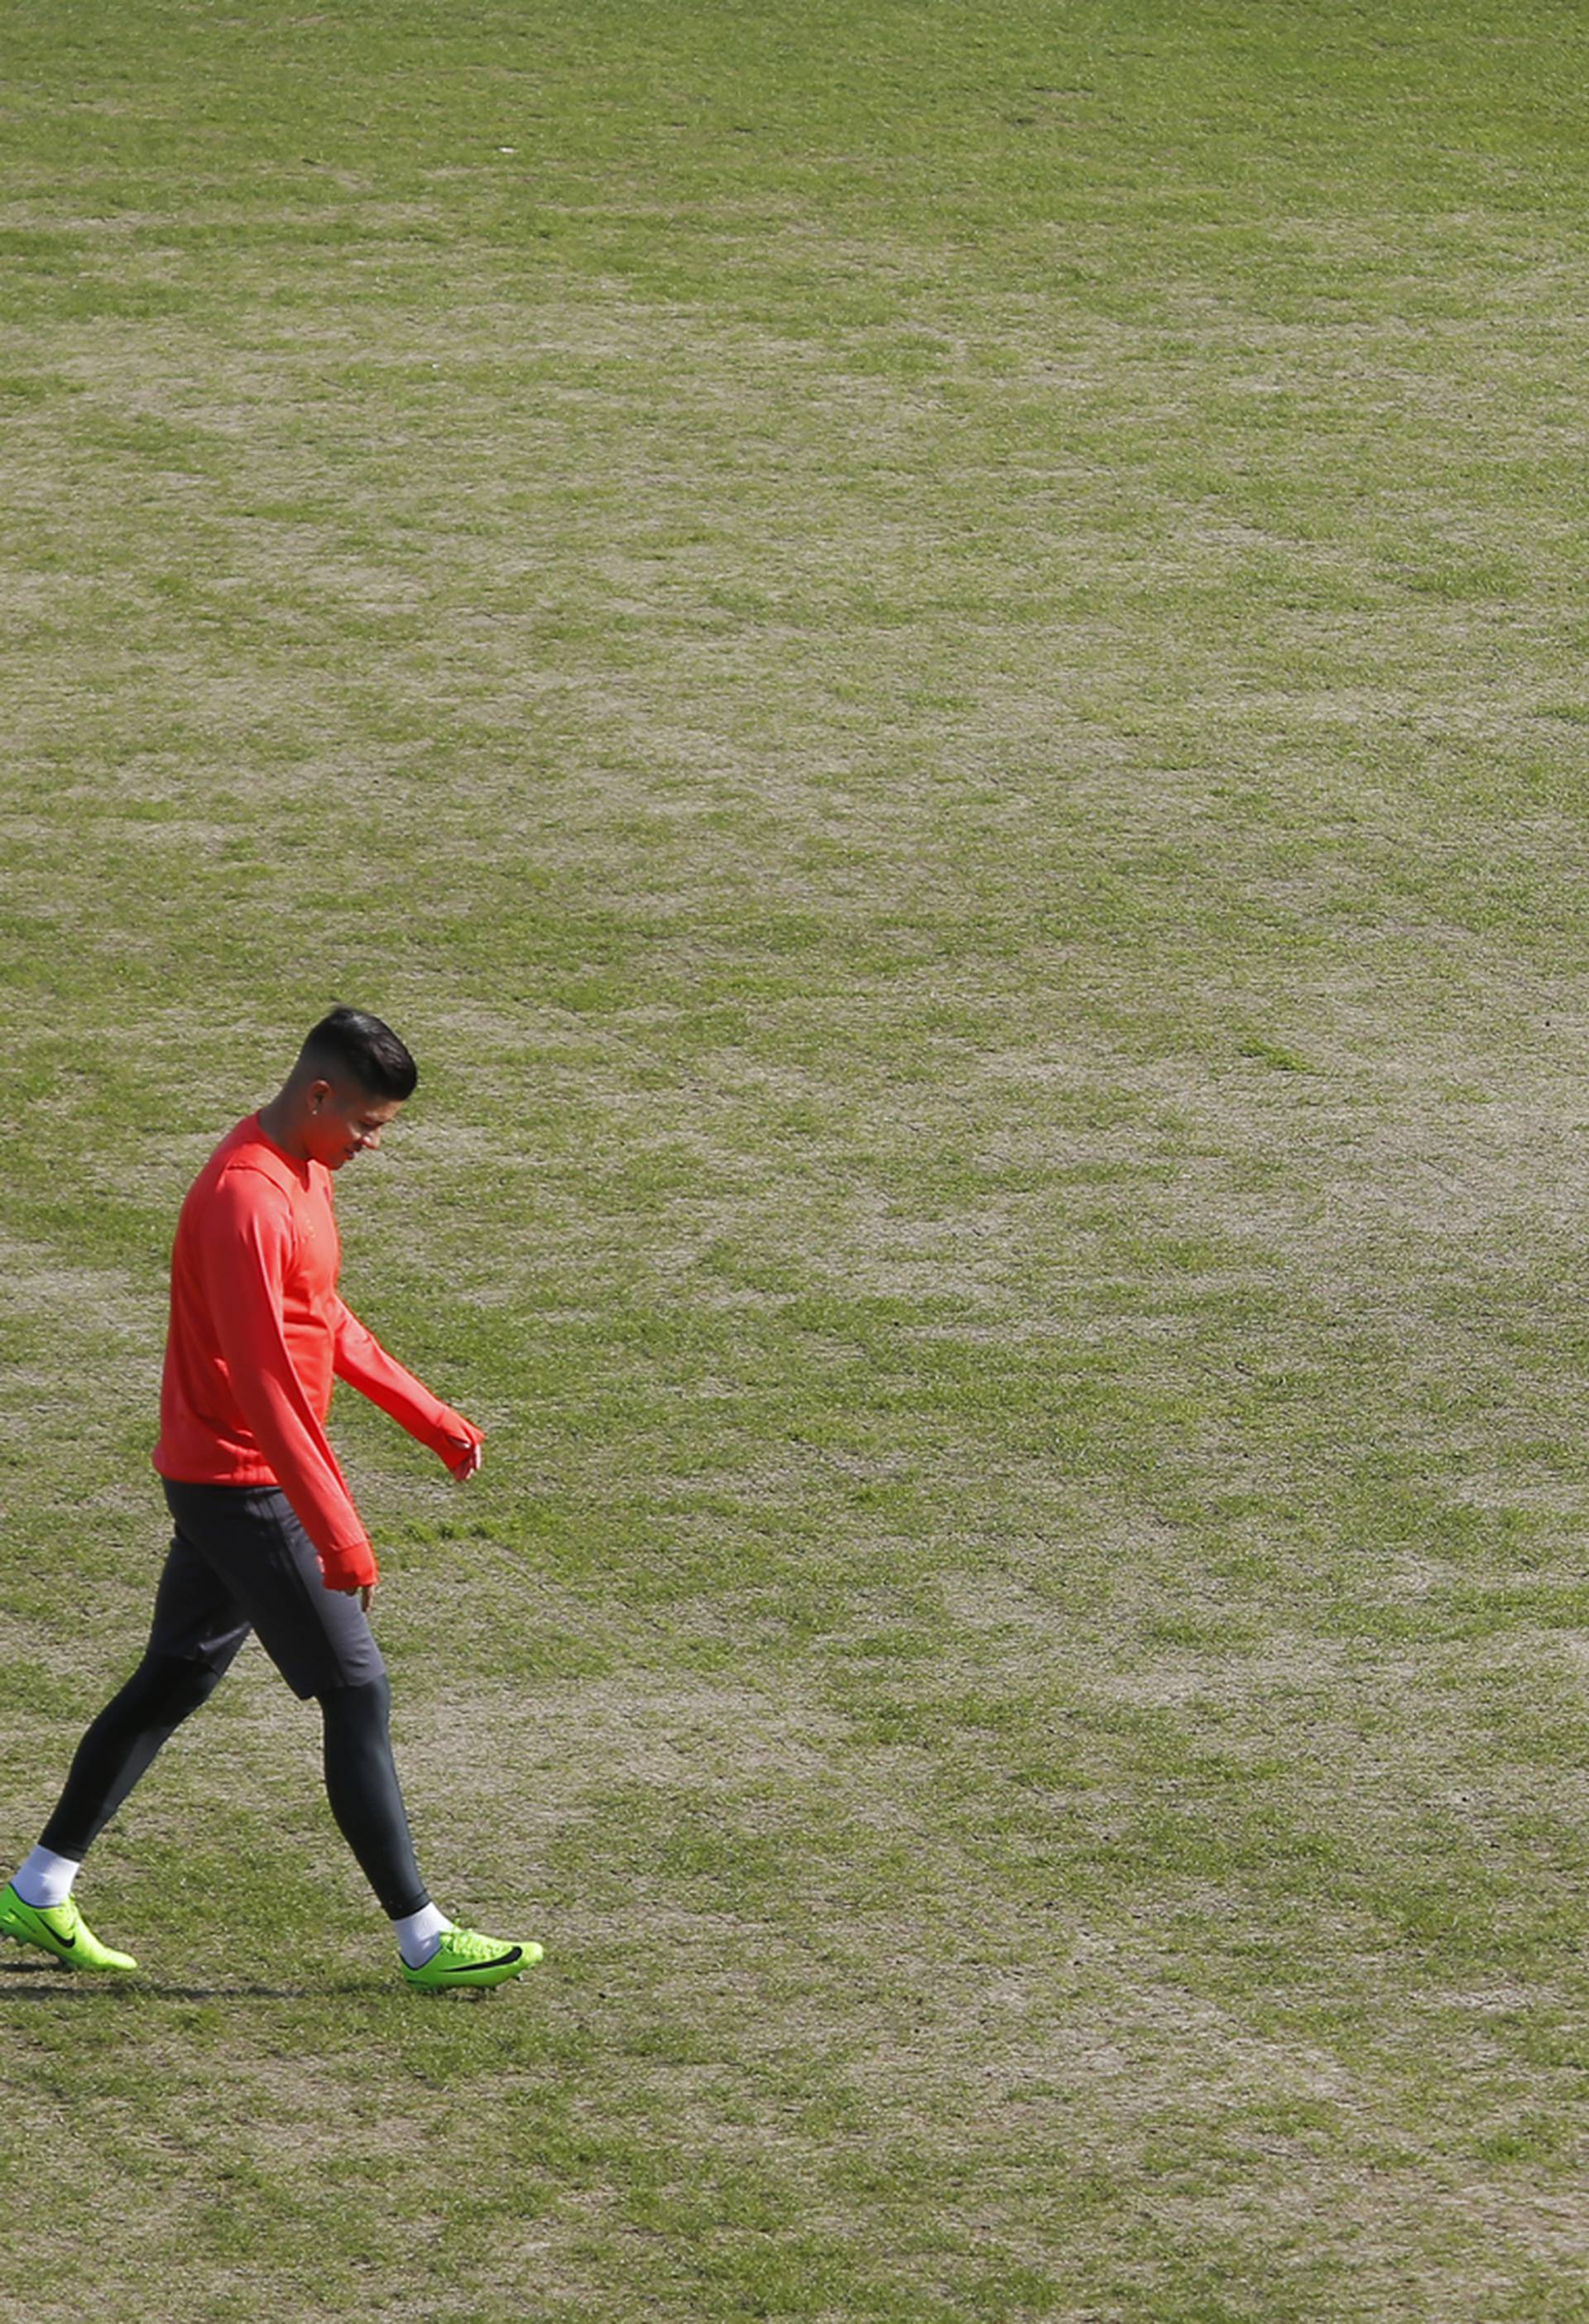 General view of Manchester United's Marcos Rojo on the pitch during training